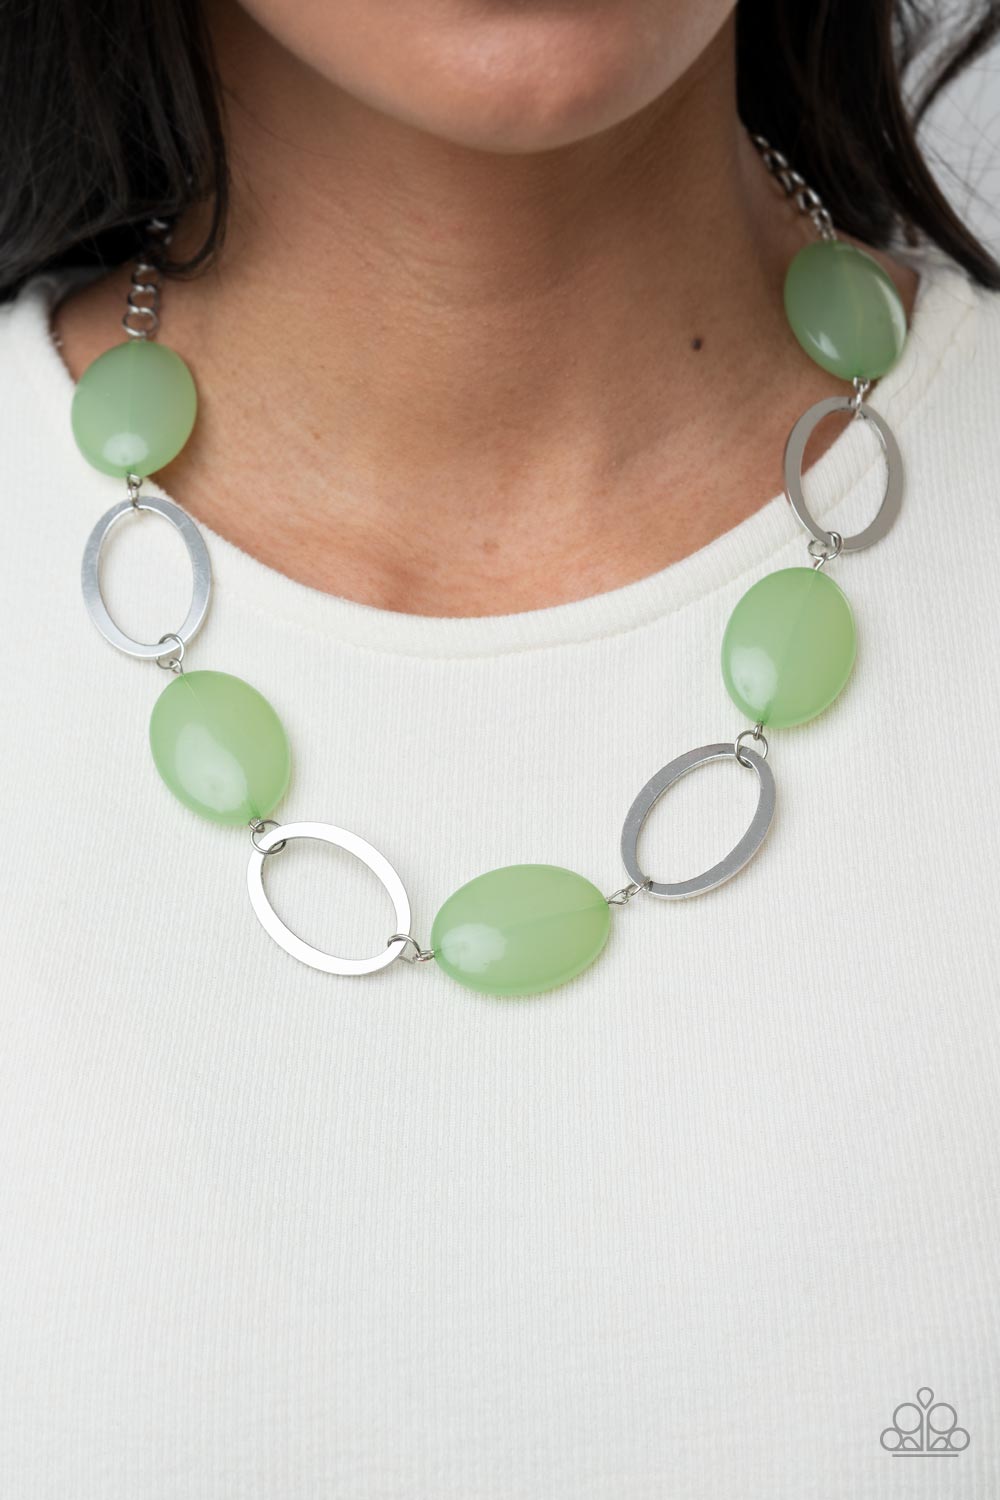 Beachside Boardwalk Green and Silver Necklace - Paparazzi Accessories- lightbox - CarasShop.com - $5 Jewelry by Cara Jewels